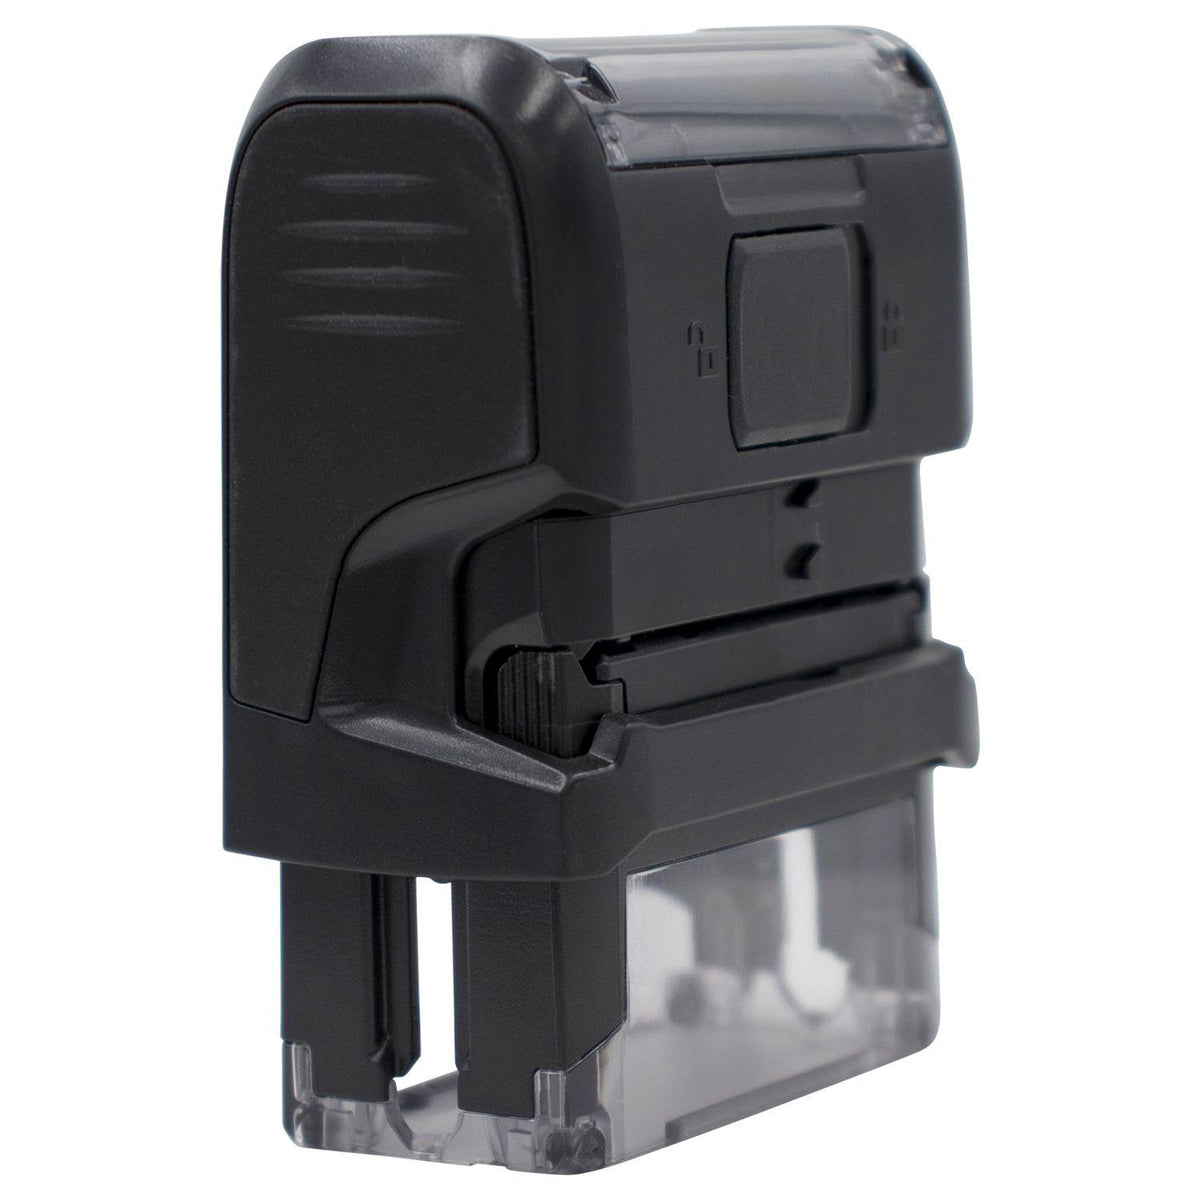 Self-Inking Bold Copy Stamp - Engineer Seal Stamps - Brand_Trodat, Impression Size_Small, Stamp Type_Self-Inking Stamp, Type of Use_General, Type of Use_Office